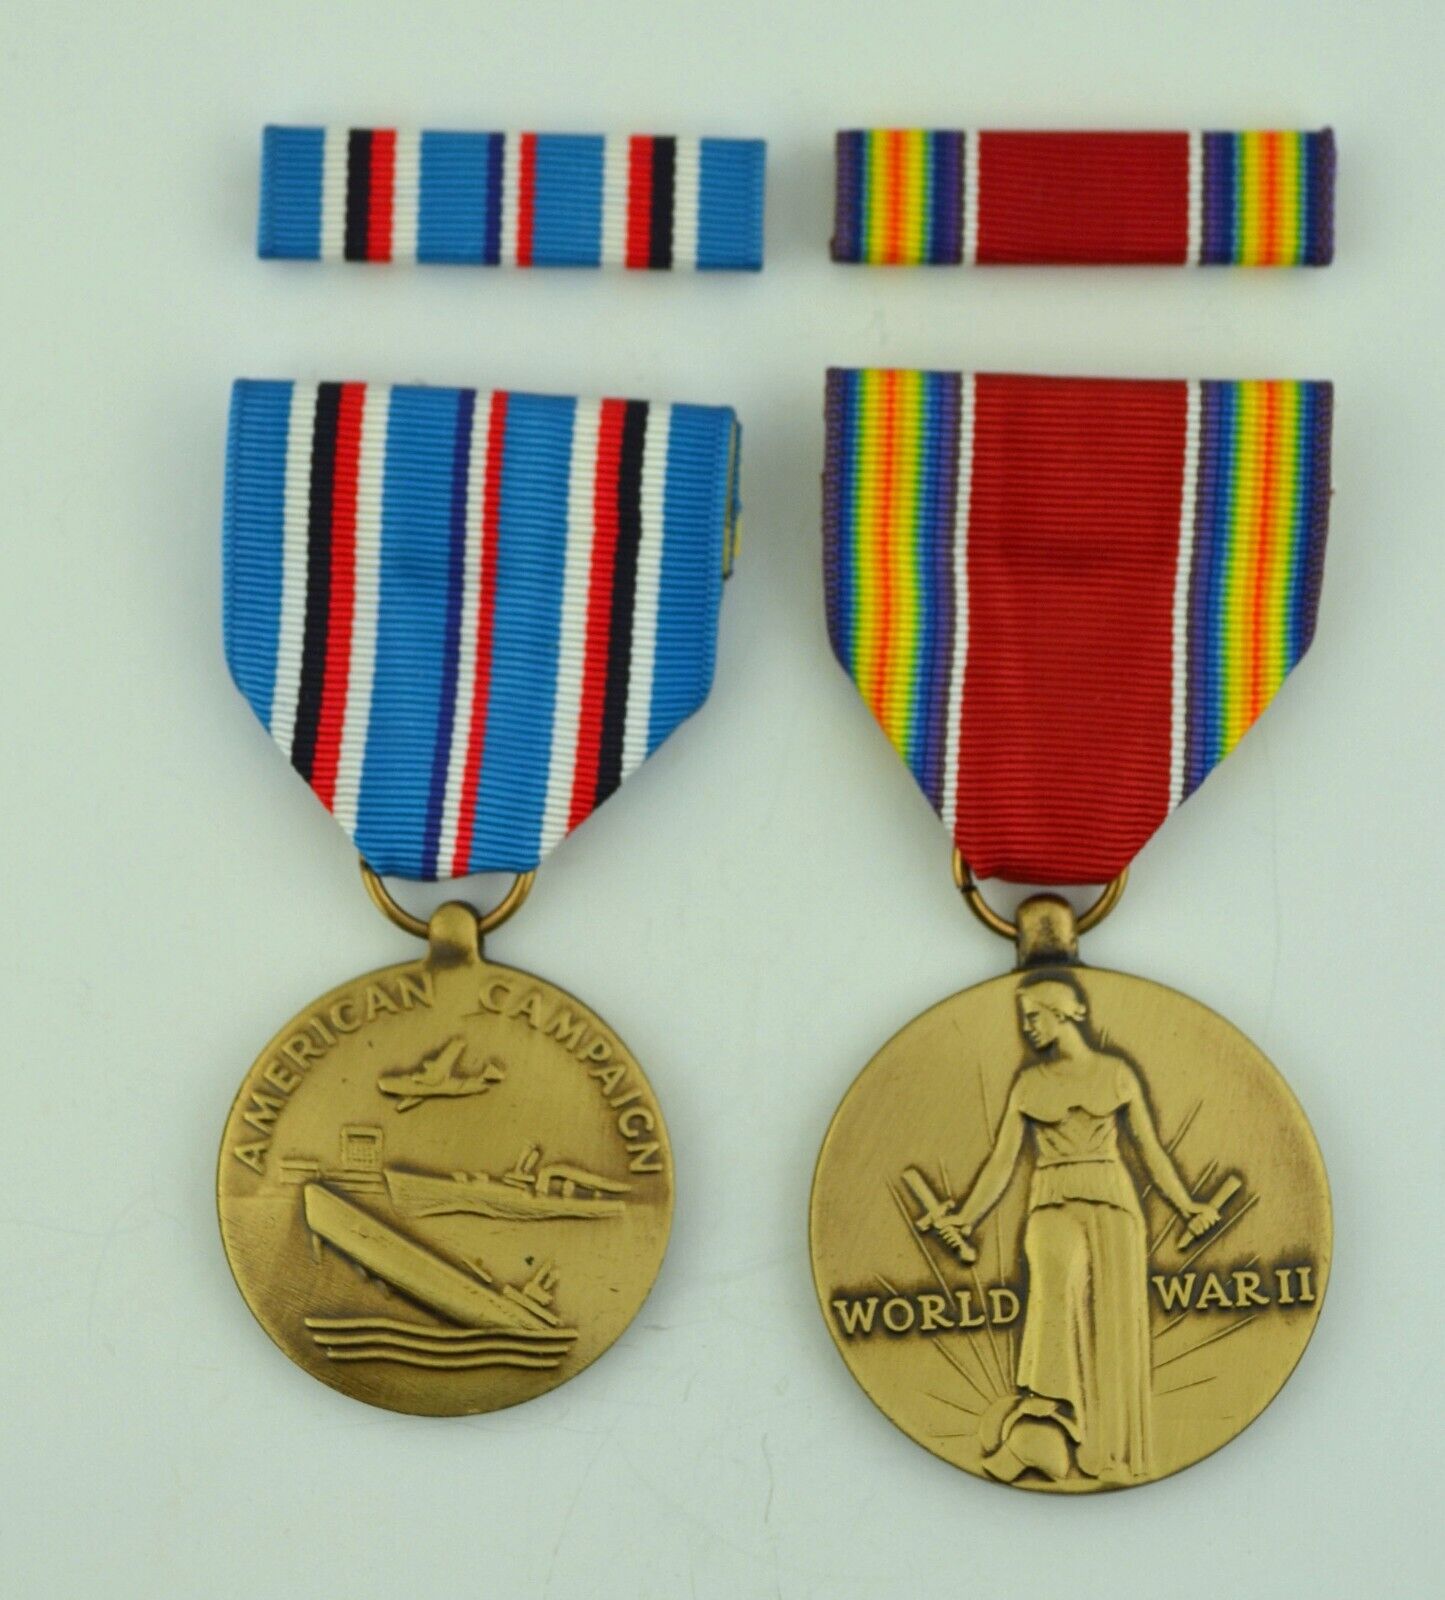 2 WWII Medals & Ribbons - American Theater & WW2 Victory - Regulation Full Size